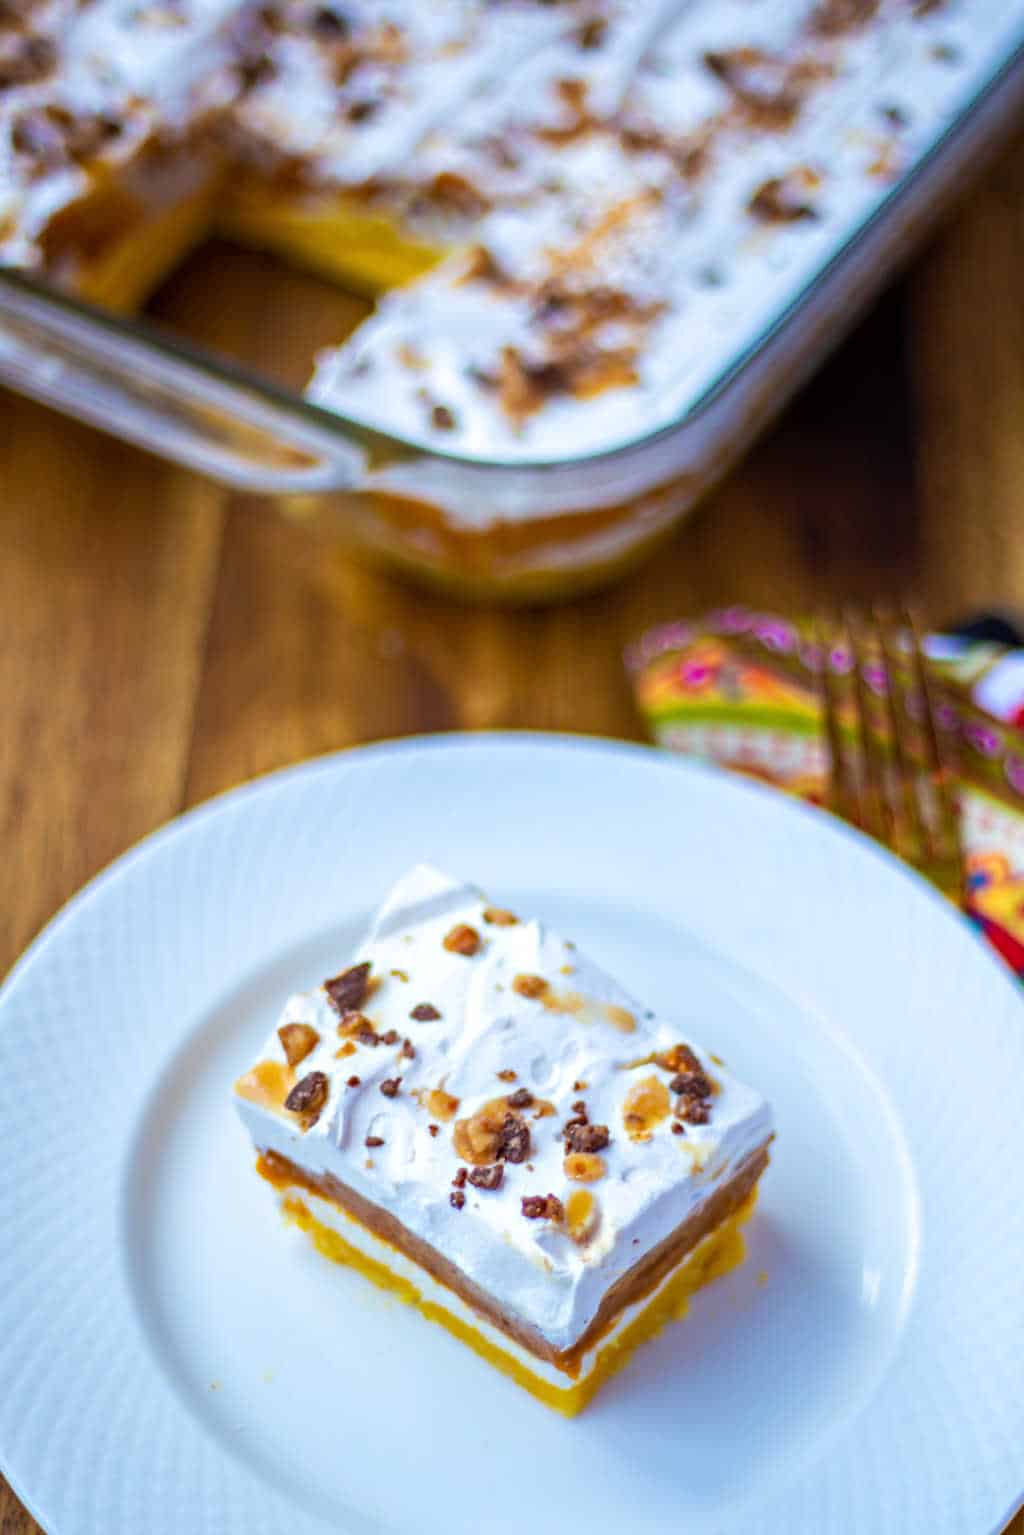 a slice of pumpkin delight on a plate on a wooden table